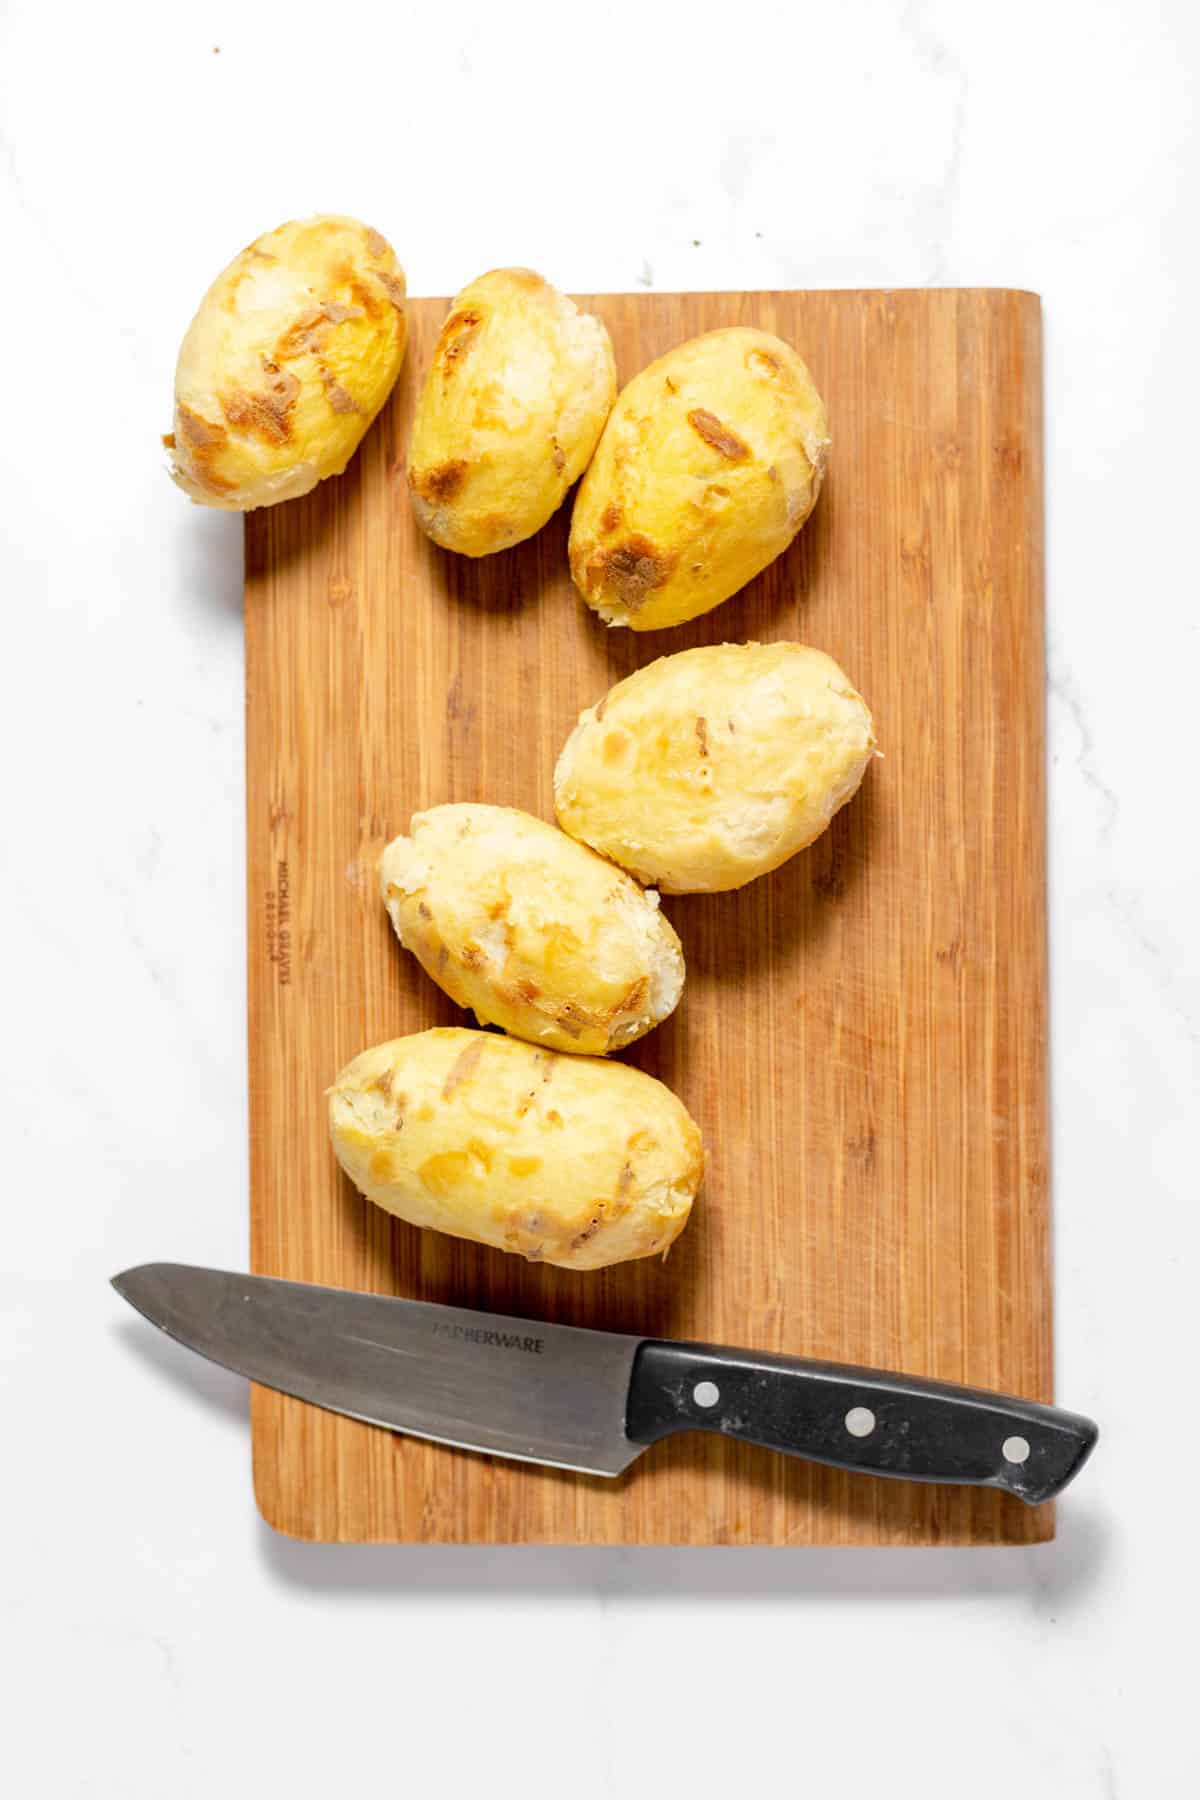 Peeled baked potatoes on a cutting board.